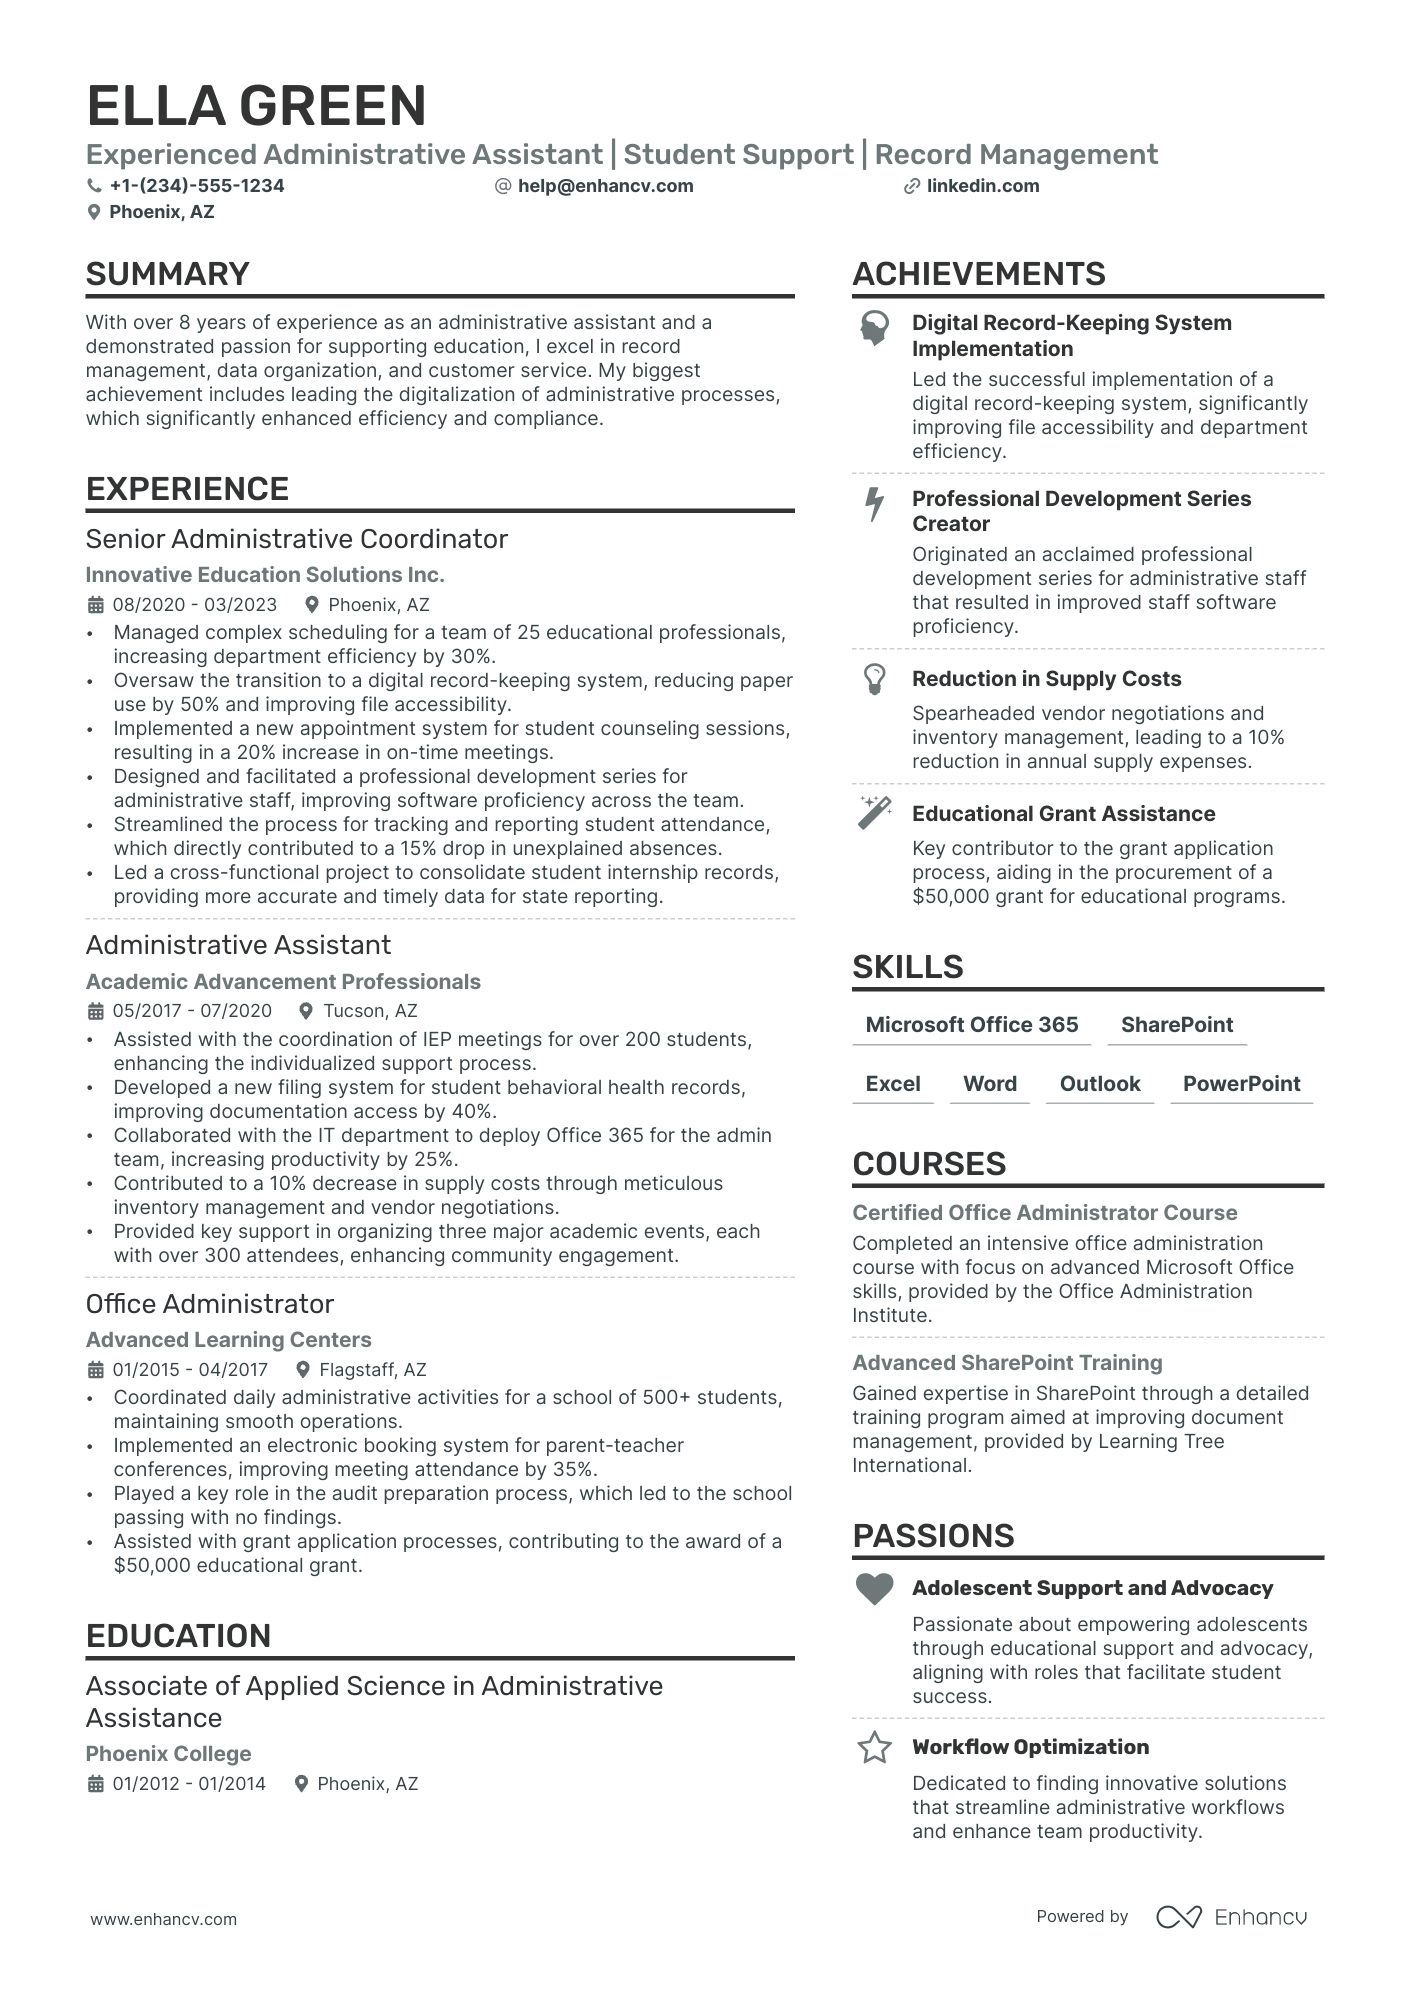 School Administrative Assistant resume example